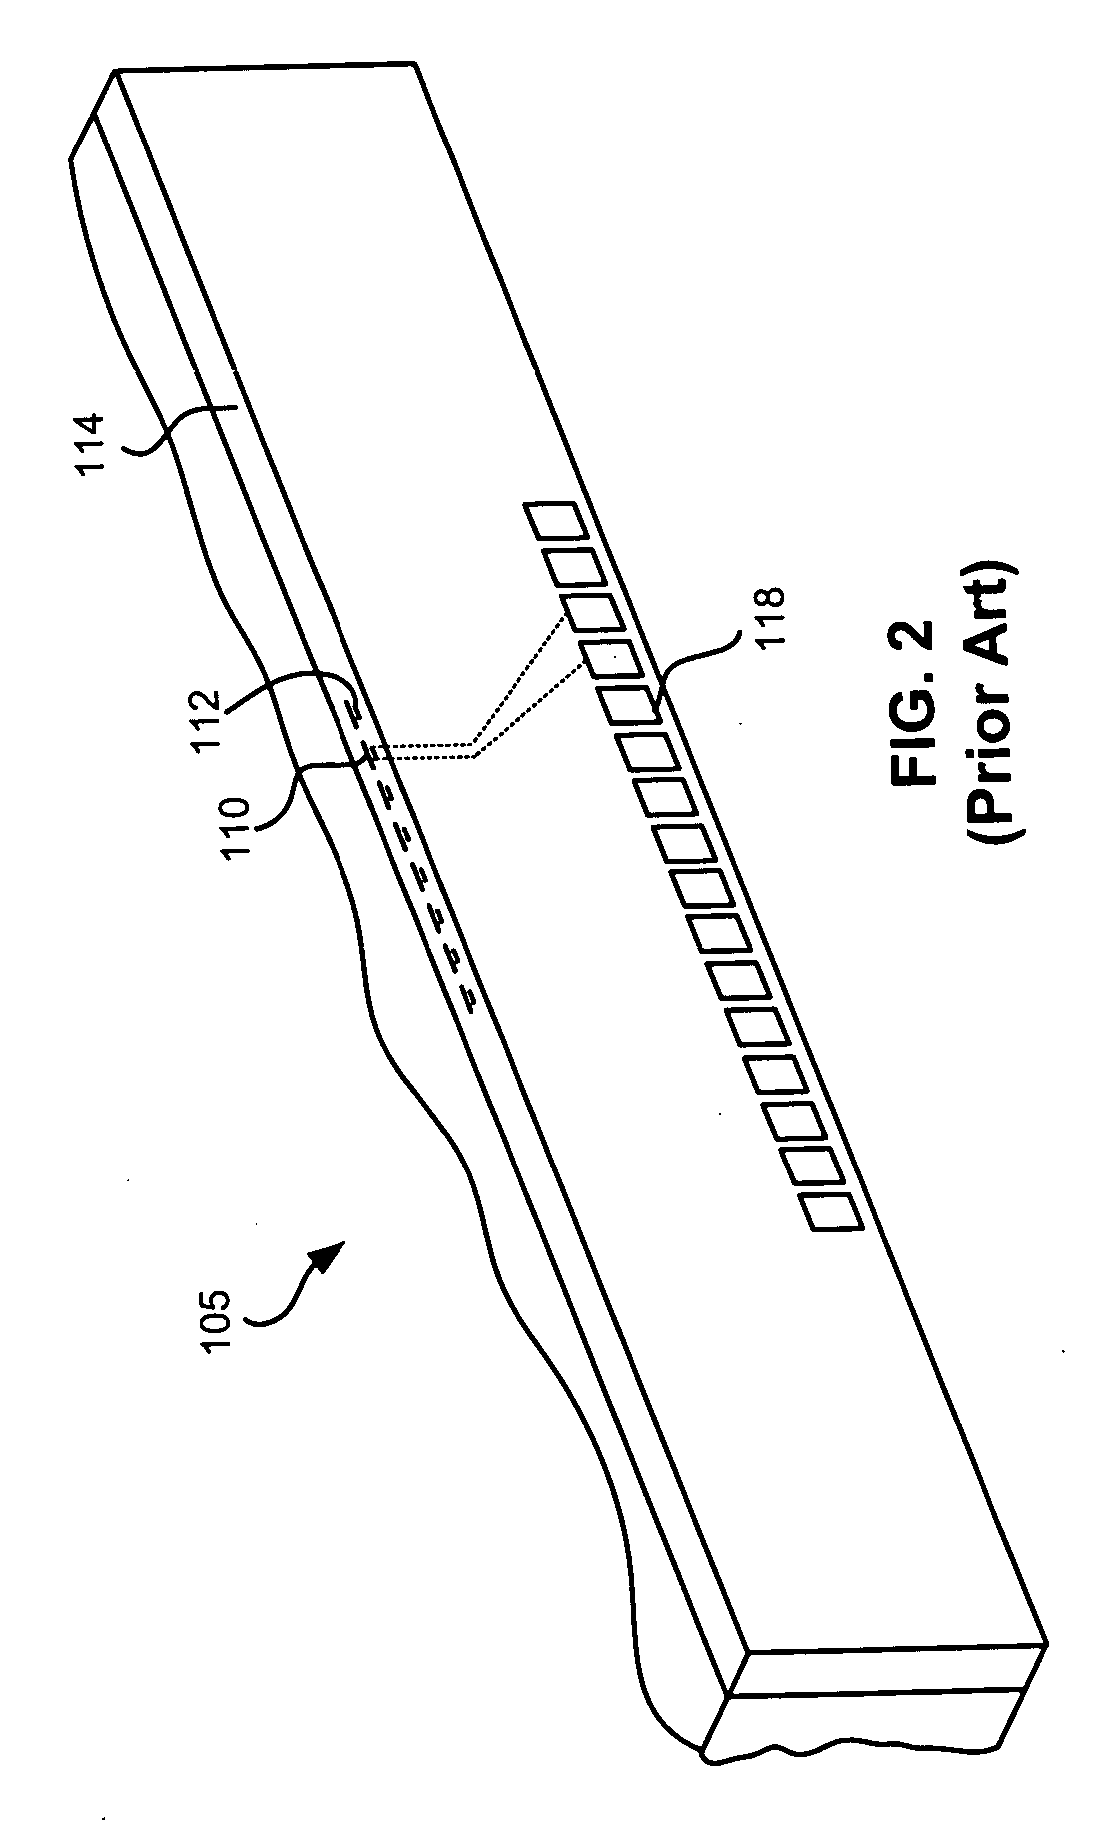 Multi-port cable for removable ESD/EOD protection for electronic devices